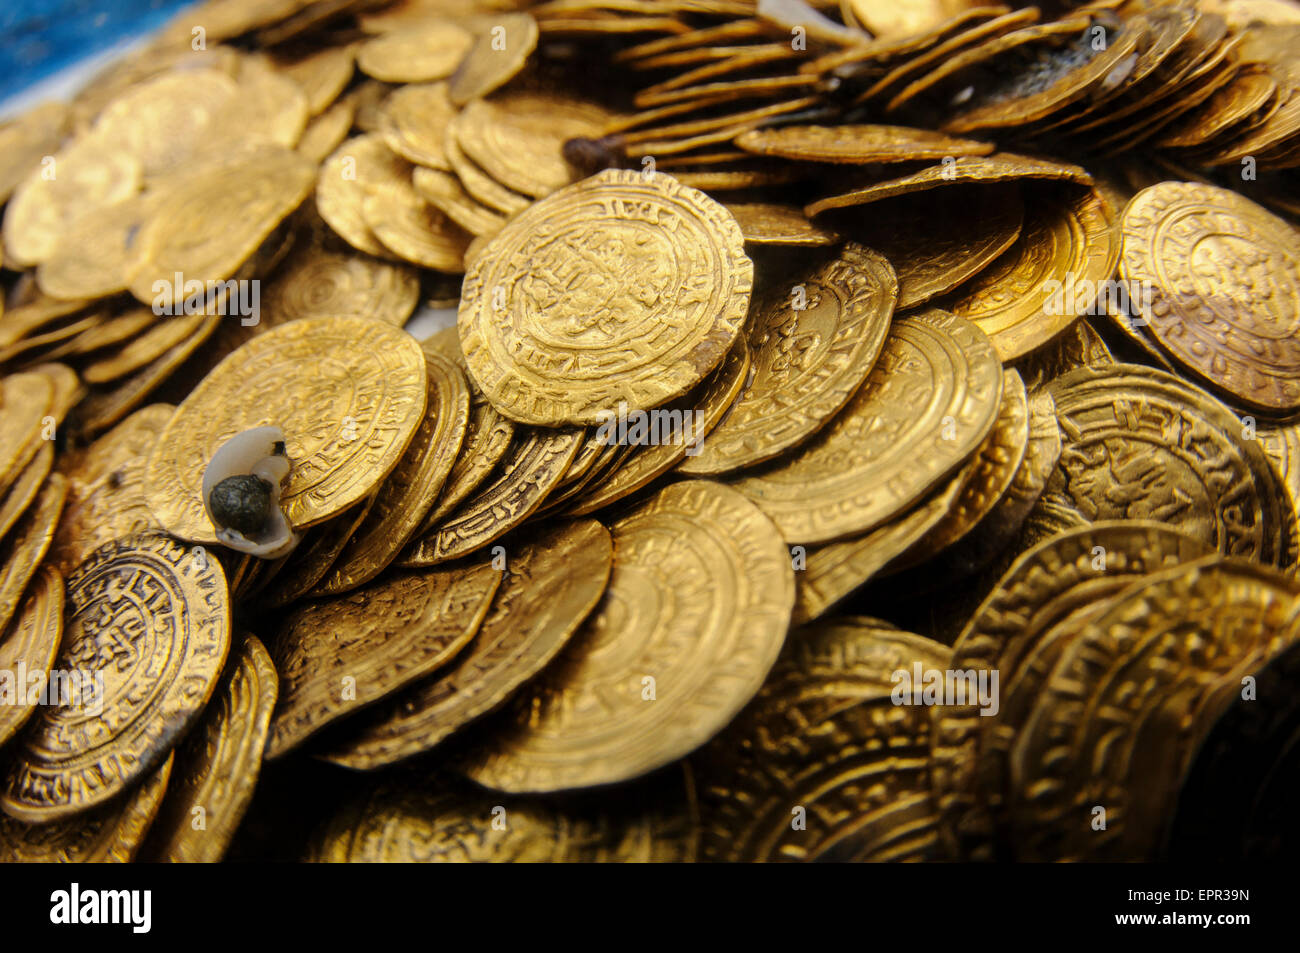 Scuba Divers uncover a hoard of 2000 gold coins from the Fatimid period (eleventh century CE) in the ancient harbour of Caesarea Stock Photo